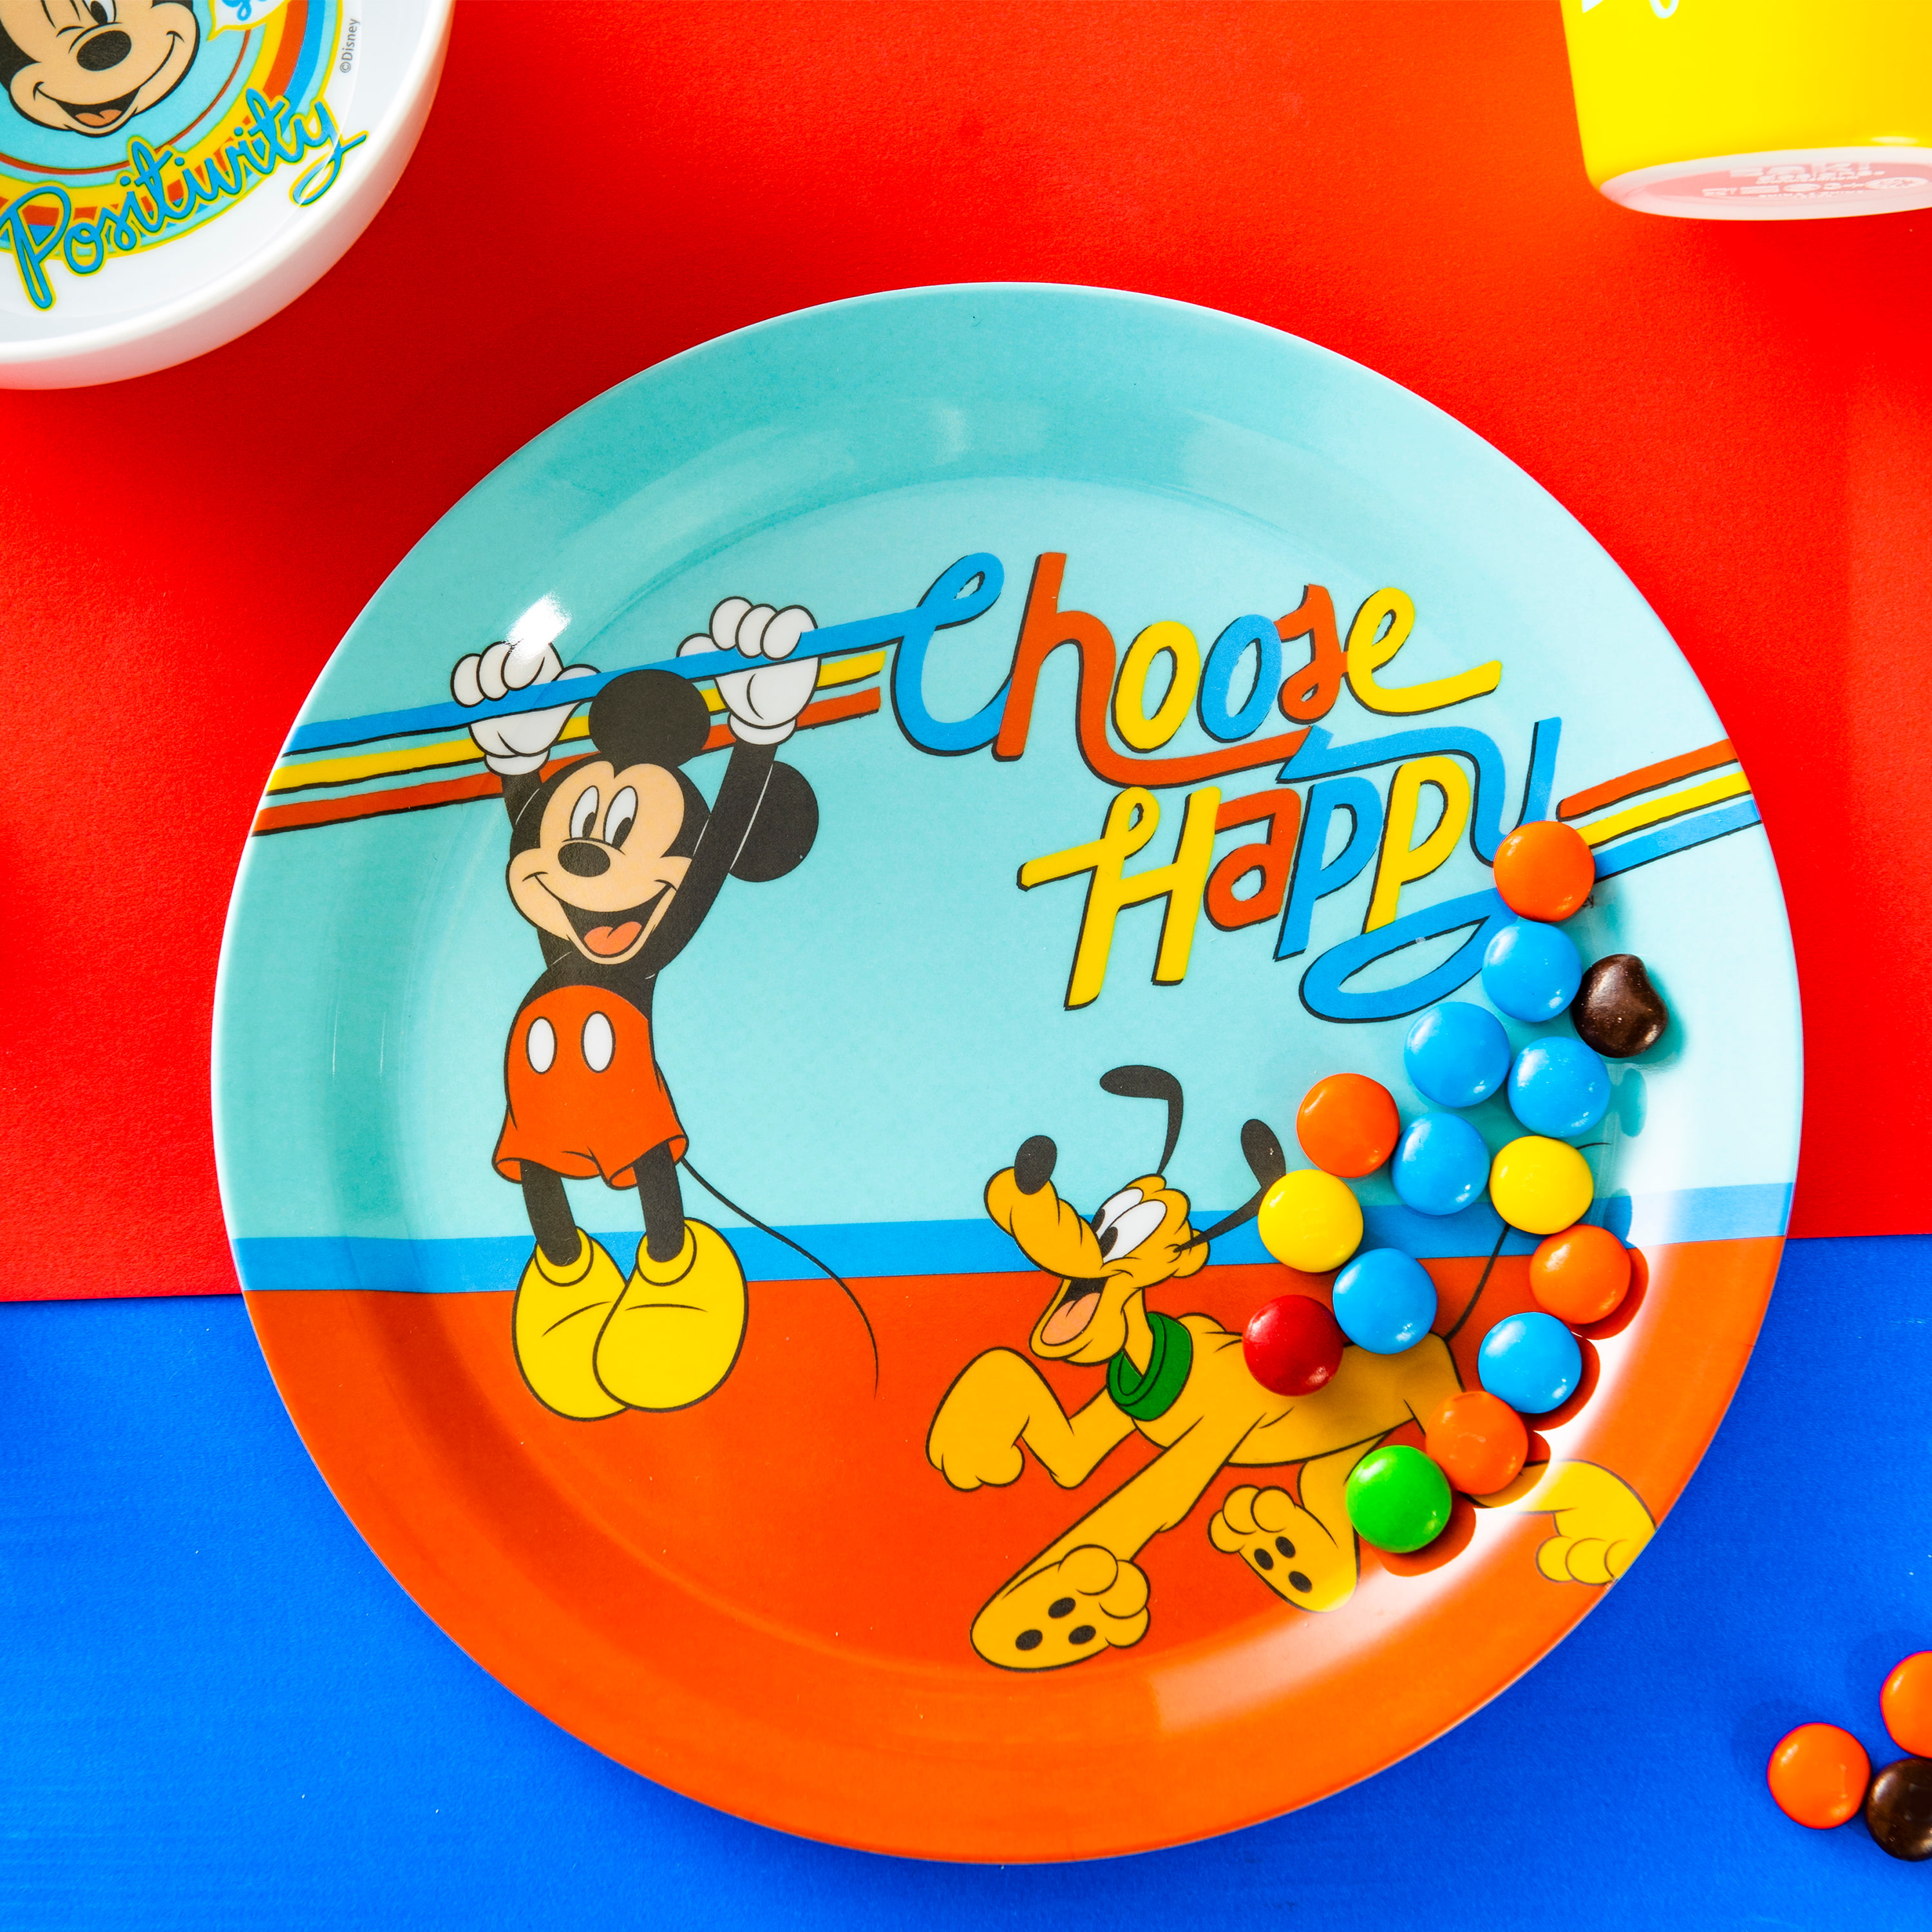 Disney Plate, Bowl, Tumbler, Water Bottle and Flatware Set for Kids, Mickey Mouse, 6-piece set slideshow image 6